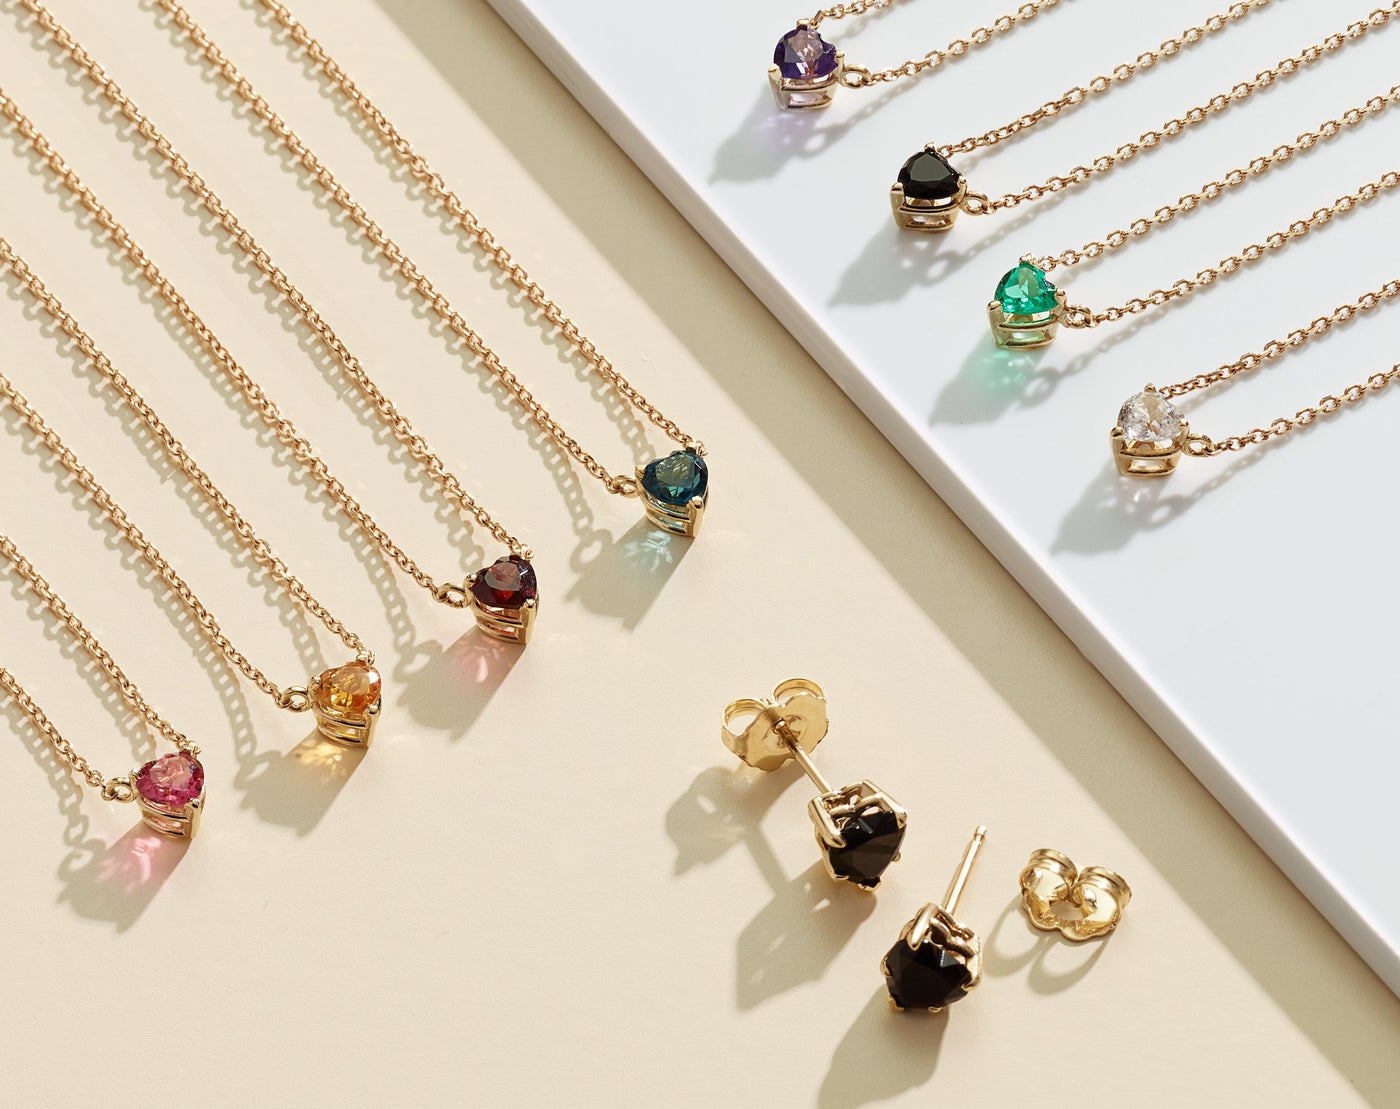 14K Gold Jewelry with Sustainably Sourced Gemstones